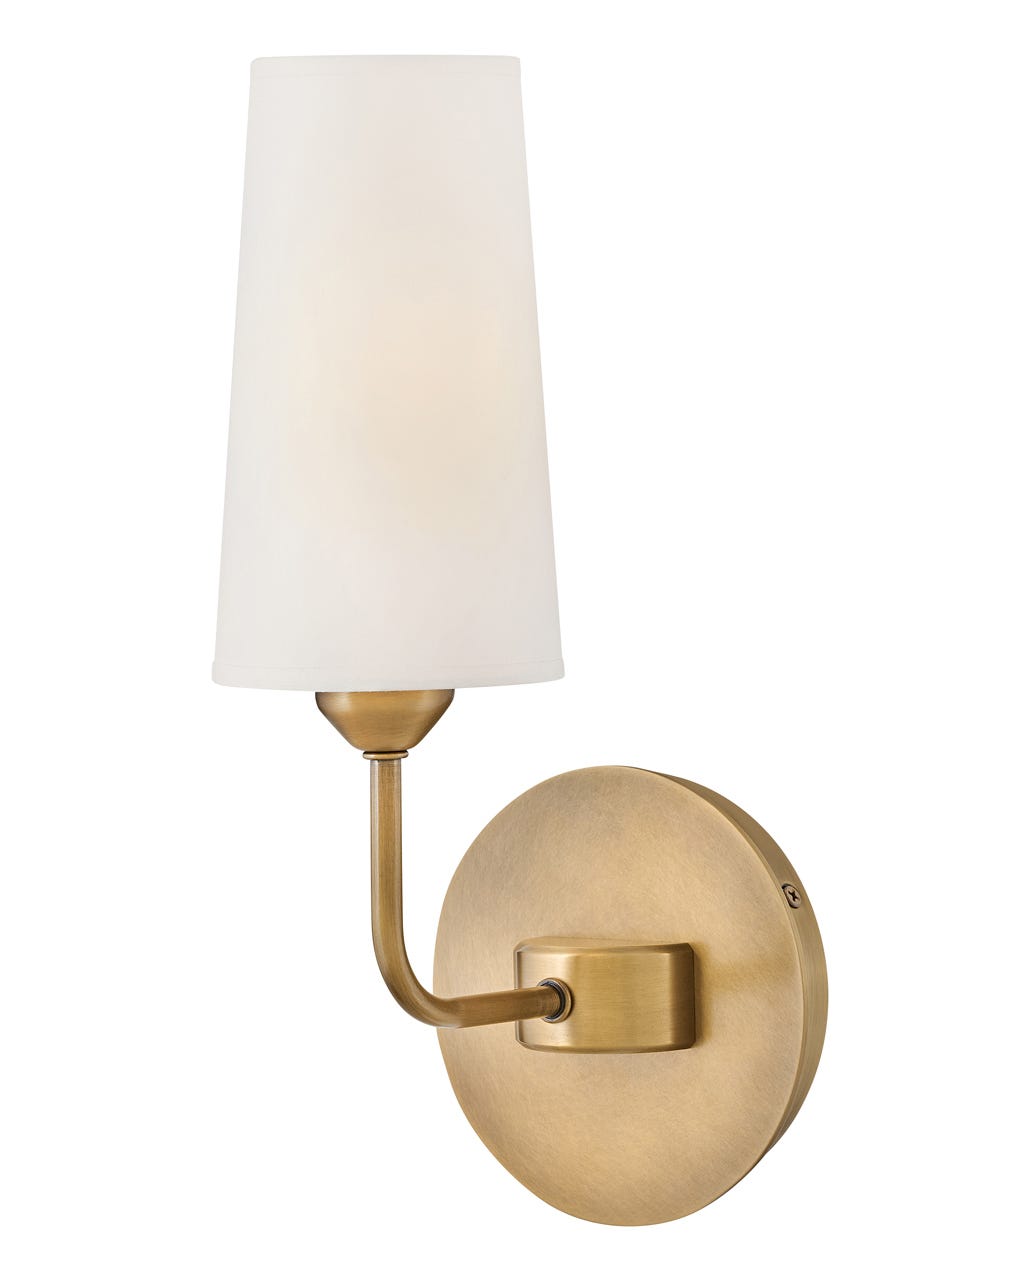 Hinkley Lewis Sconce Sconce Hinkley Heritage Brass 5.5x5.5x13.75 